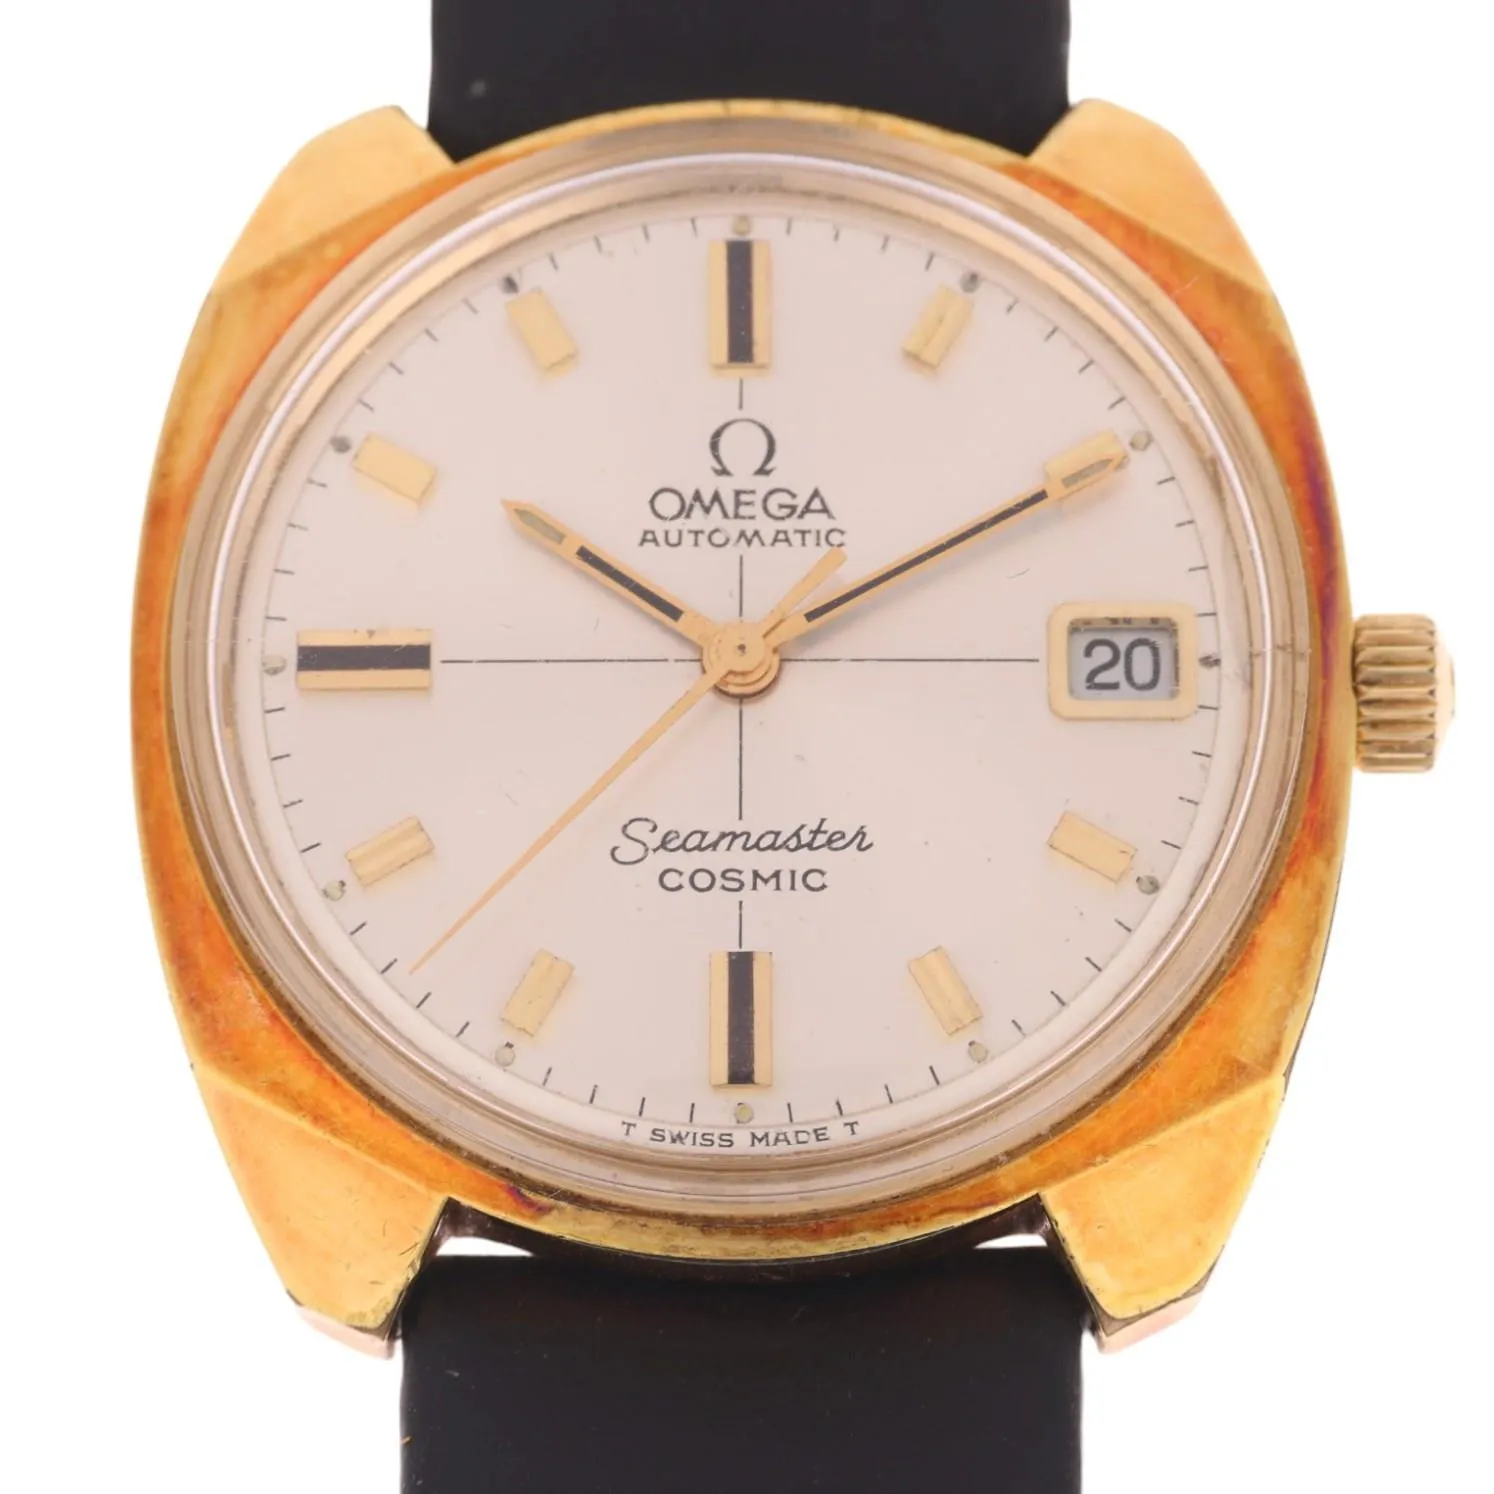 Omega Seamaster Cosmic 166.022 34mm Gold-plated Silvered